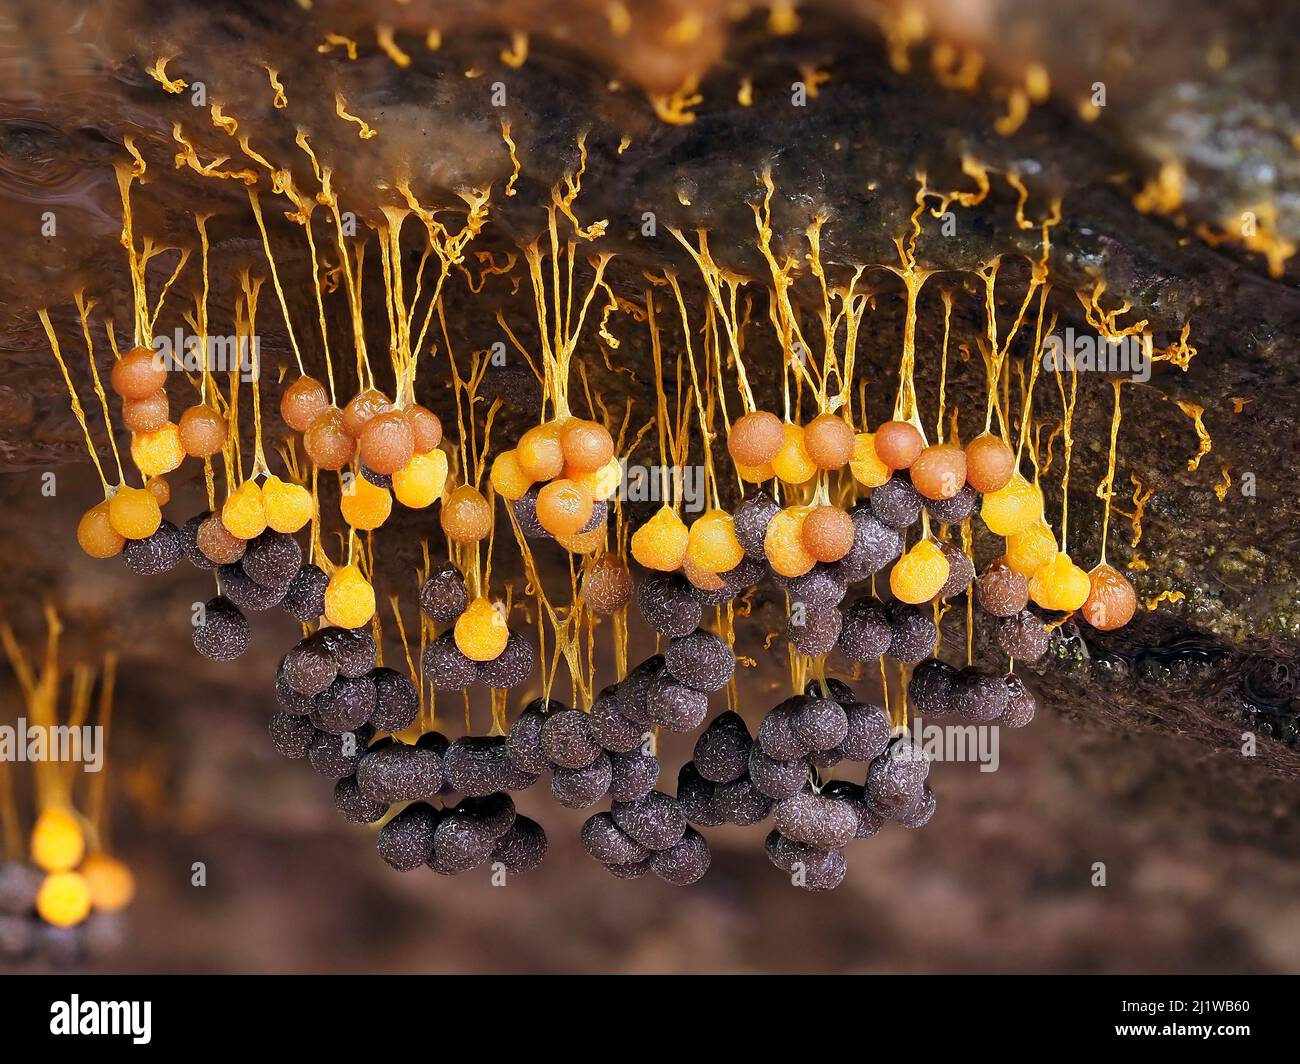 Slime mould (Badhamia utricularis), in reproductive phase. Close-up of maturing fruiting bodies (sporangia), each bearing thousands of spores. Bucking Stock Photo